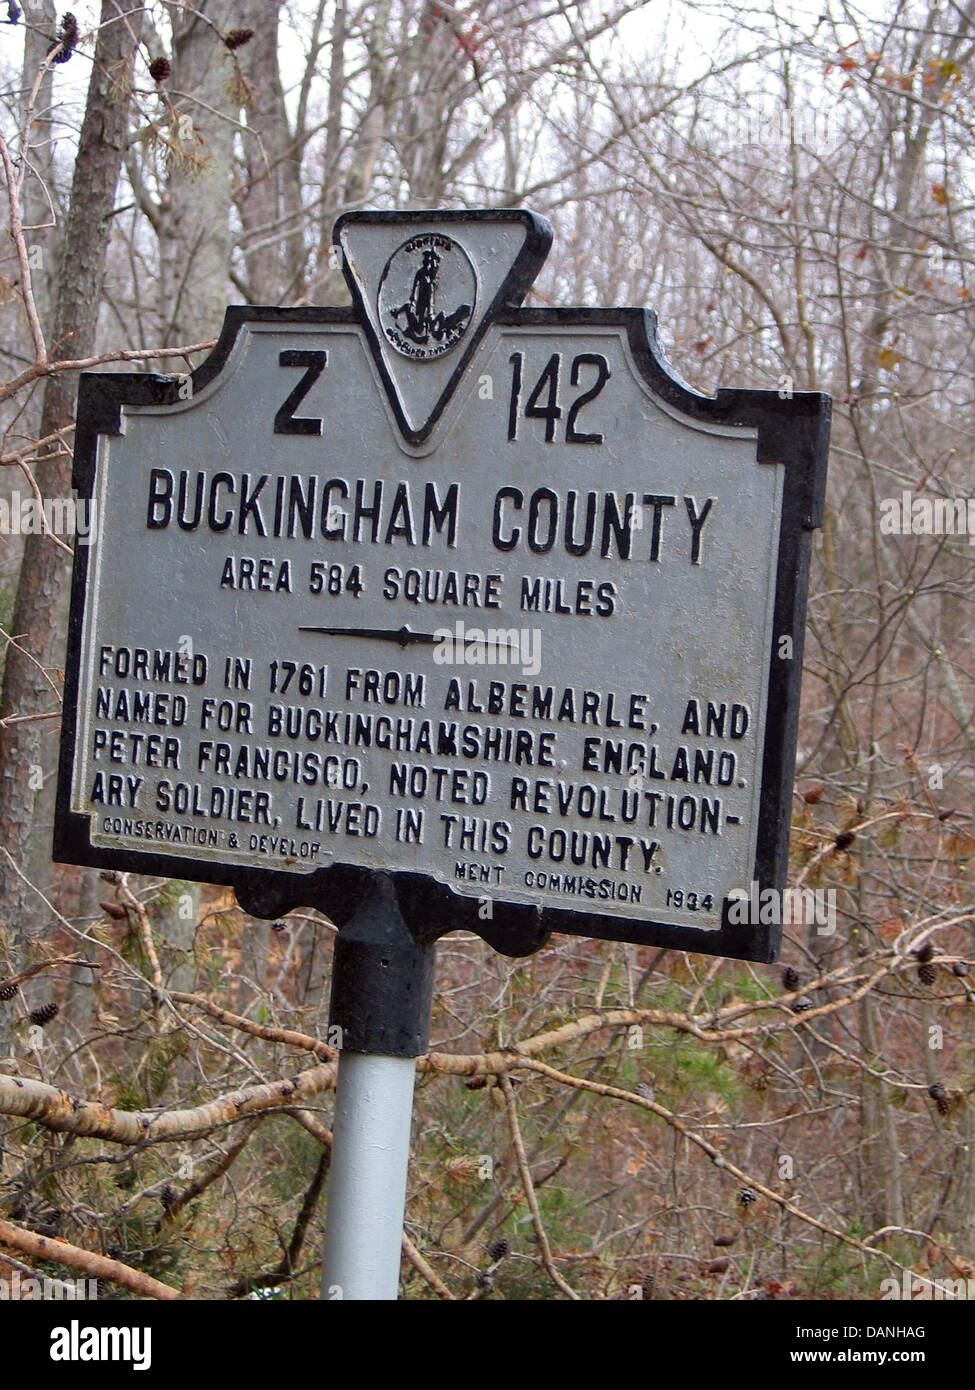 Buckingham county virginia united states hires stock photography and